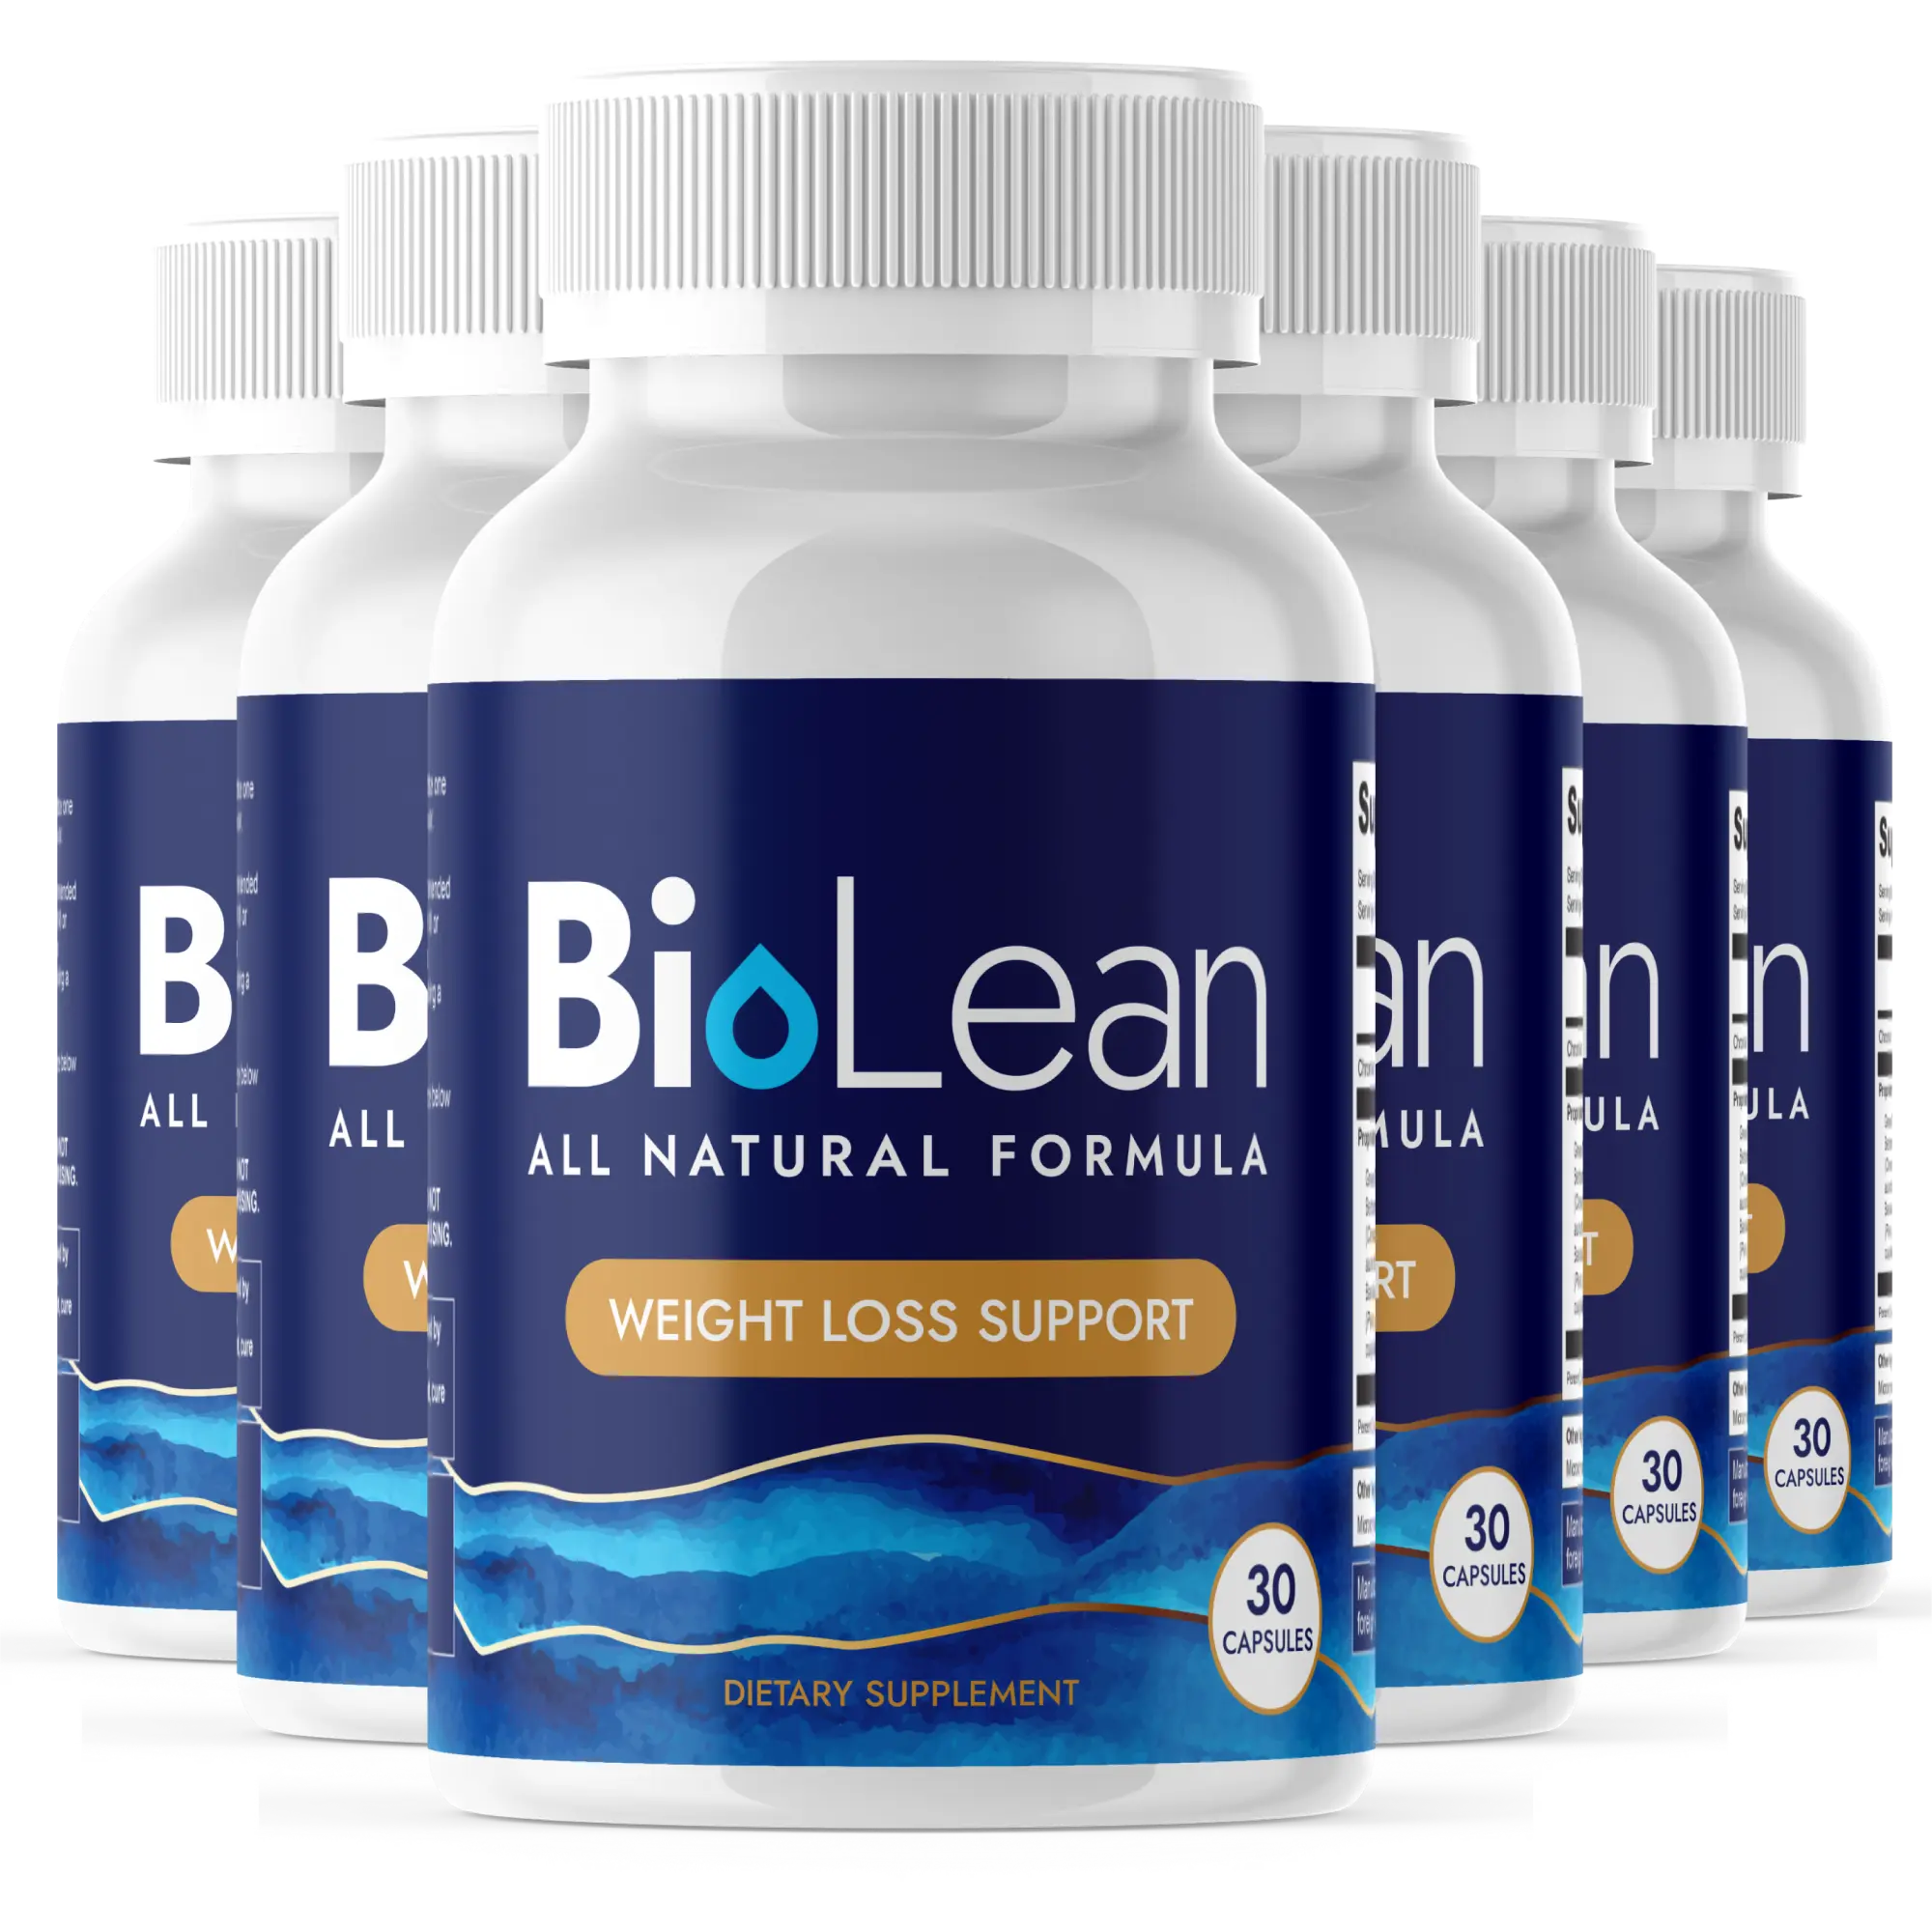 BioLean discounted price